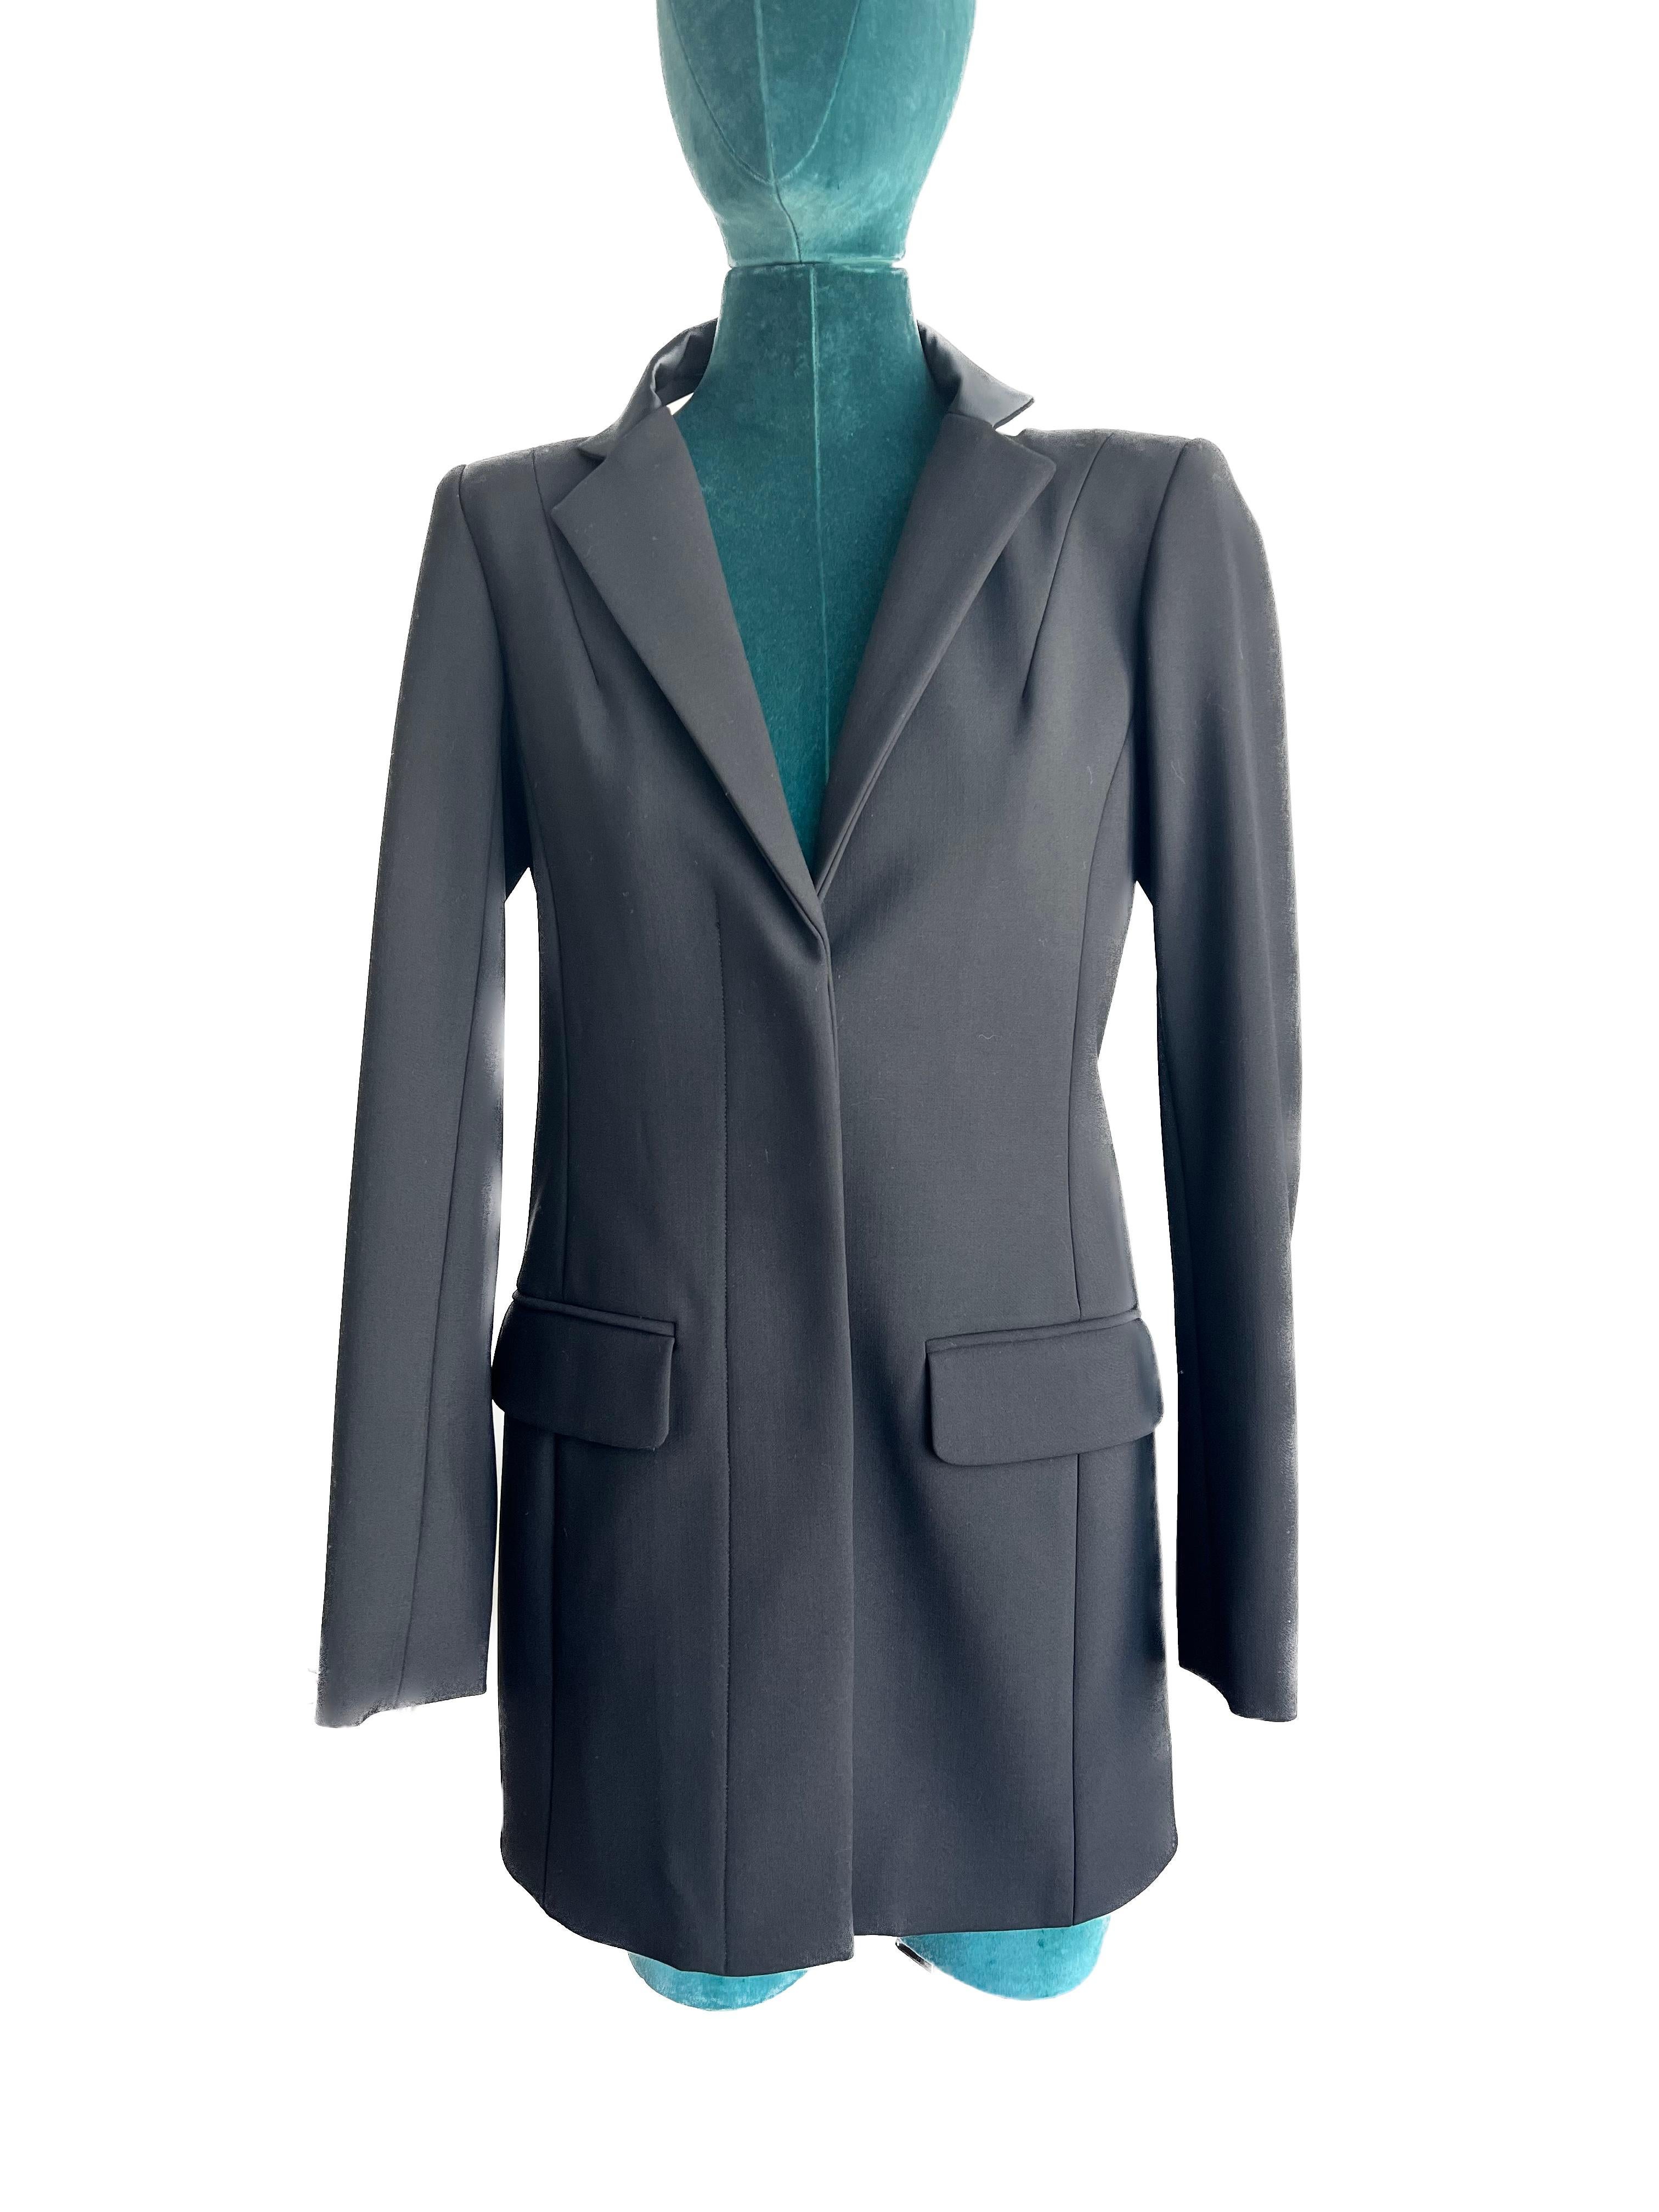 Area open back Blazer Dress with Crystal tassel In Excellent Condition For Sale In Toronto, CA